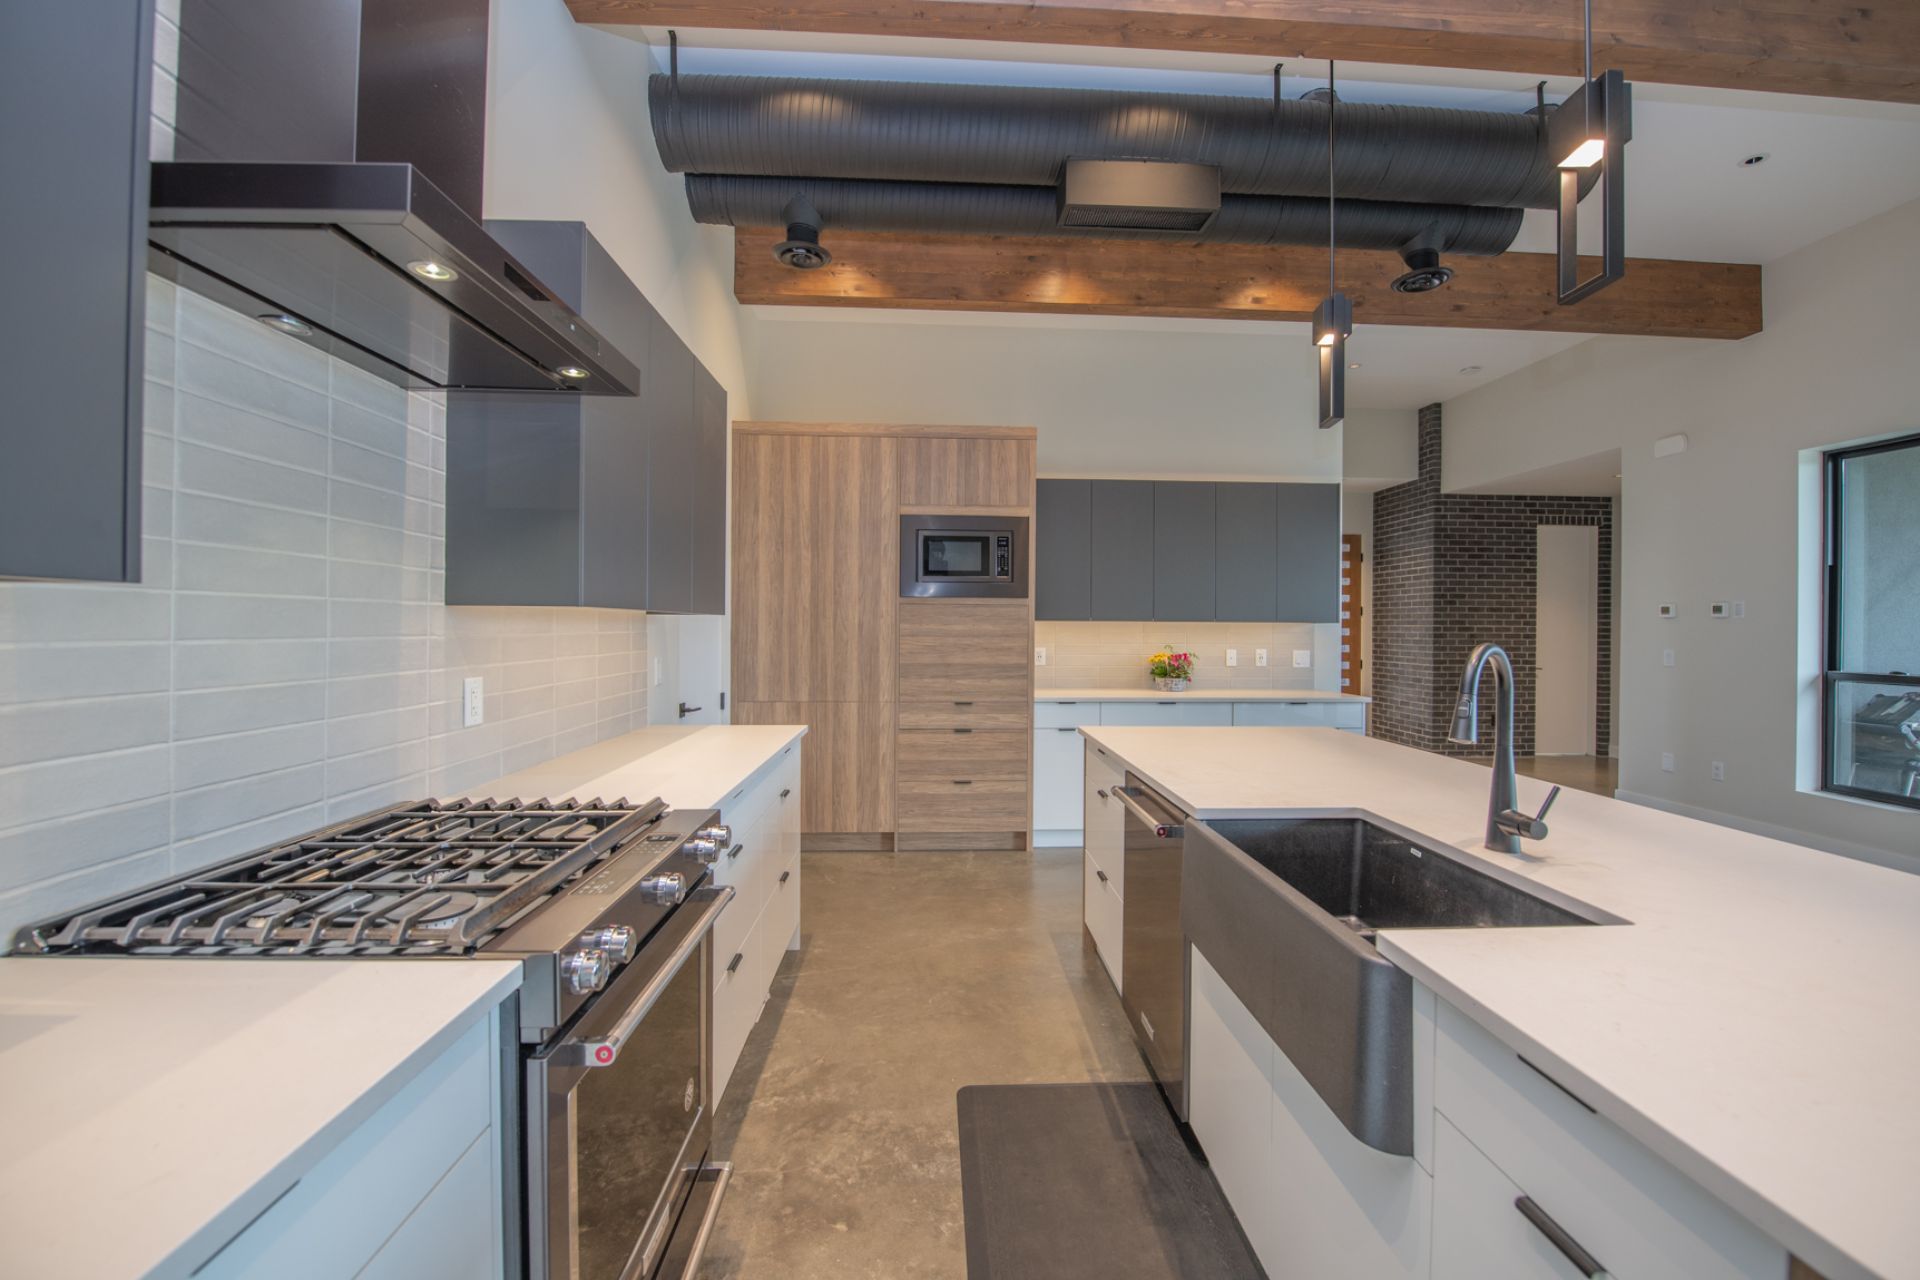 Photo of feature exposed ductwork & open structural wood beams in contemporary kitchen.